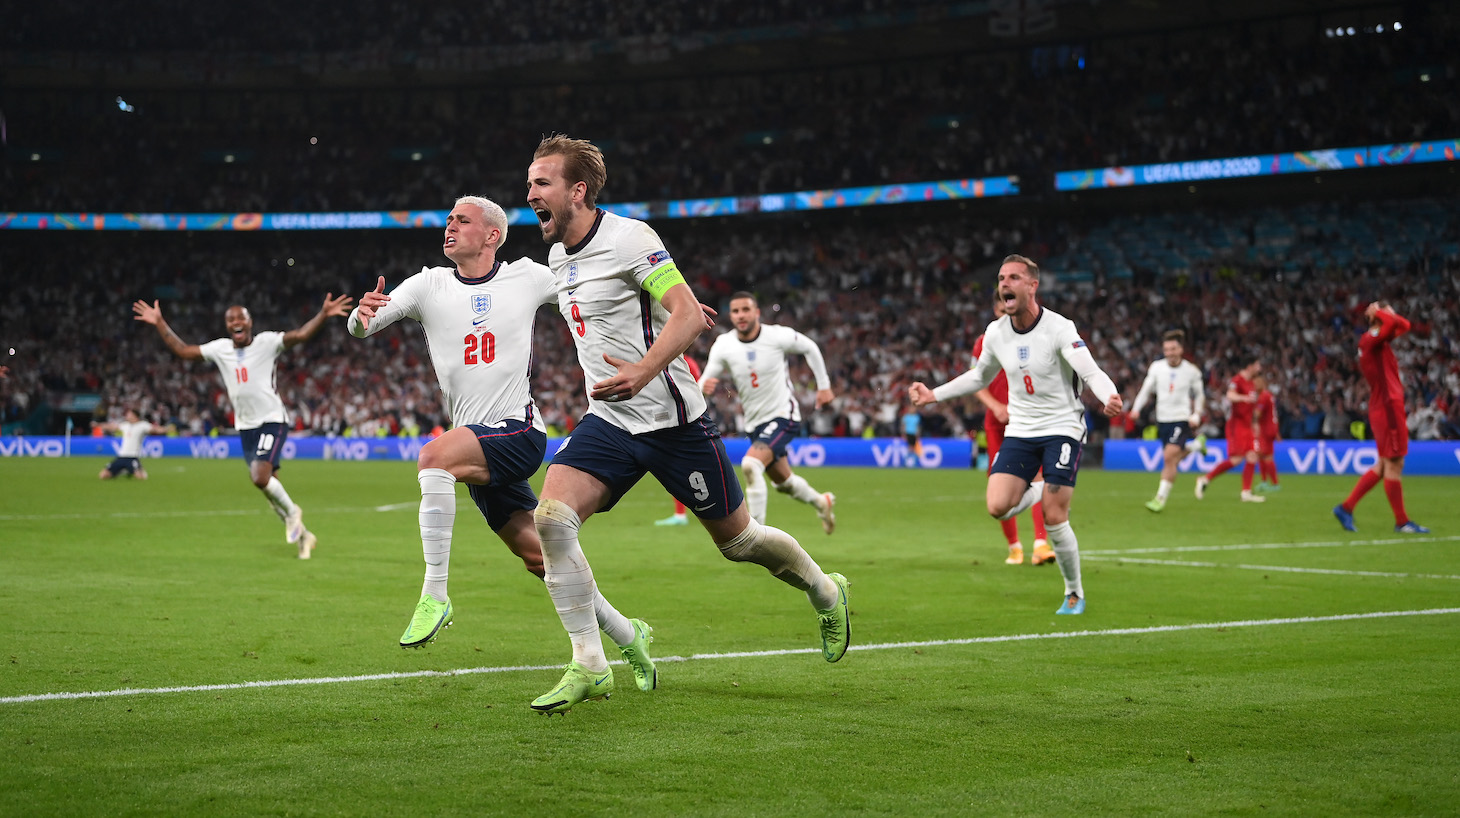 Harry Kane of England is congratulated by Phil Foden after scoring the second goal during the UEFA Euro 2020 Championship Semi-final match between England and Denmark at Wembley Stadium on July 07, 2021 in London, England.